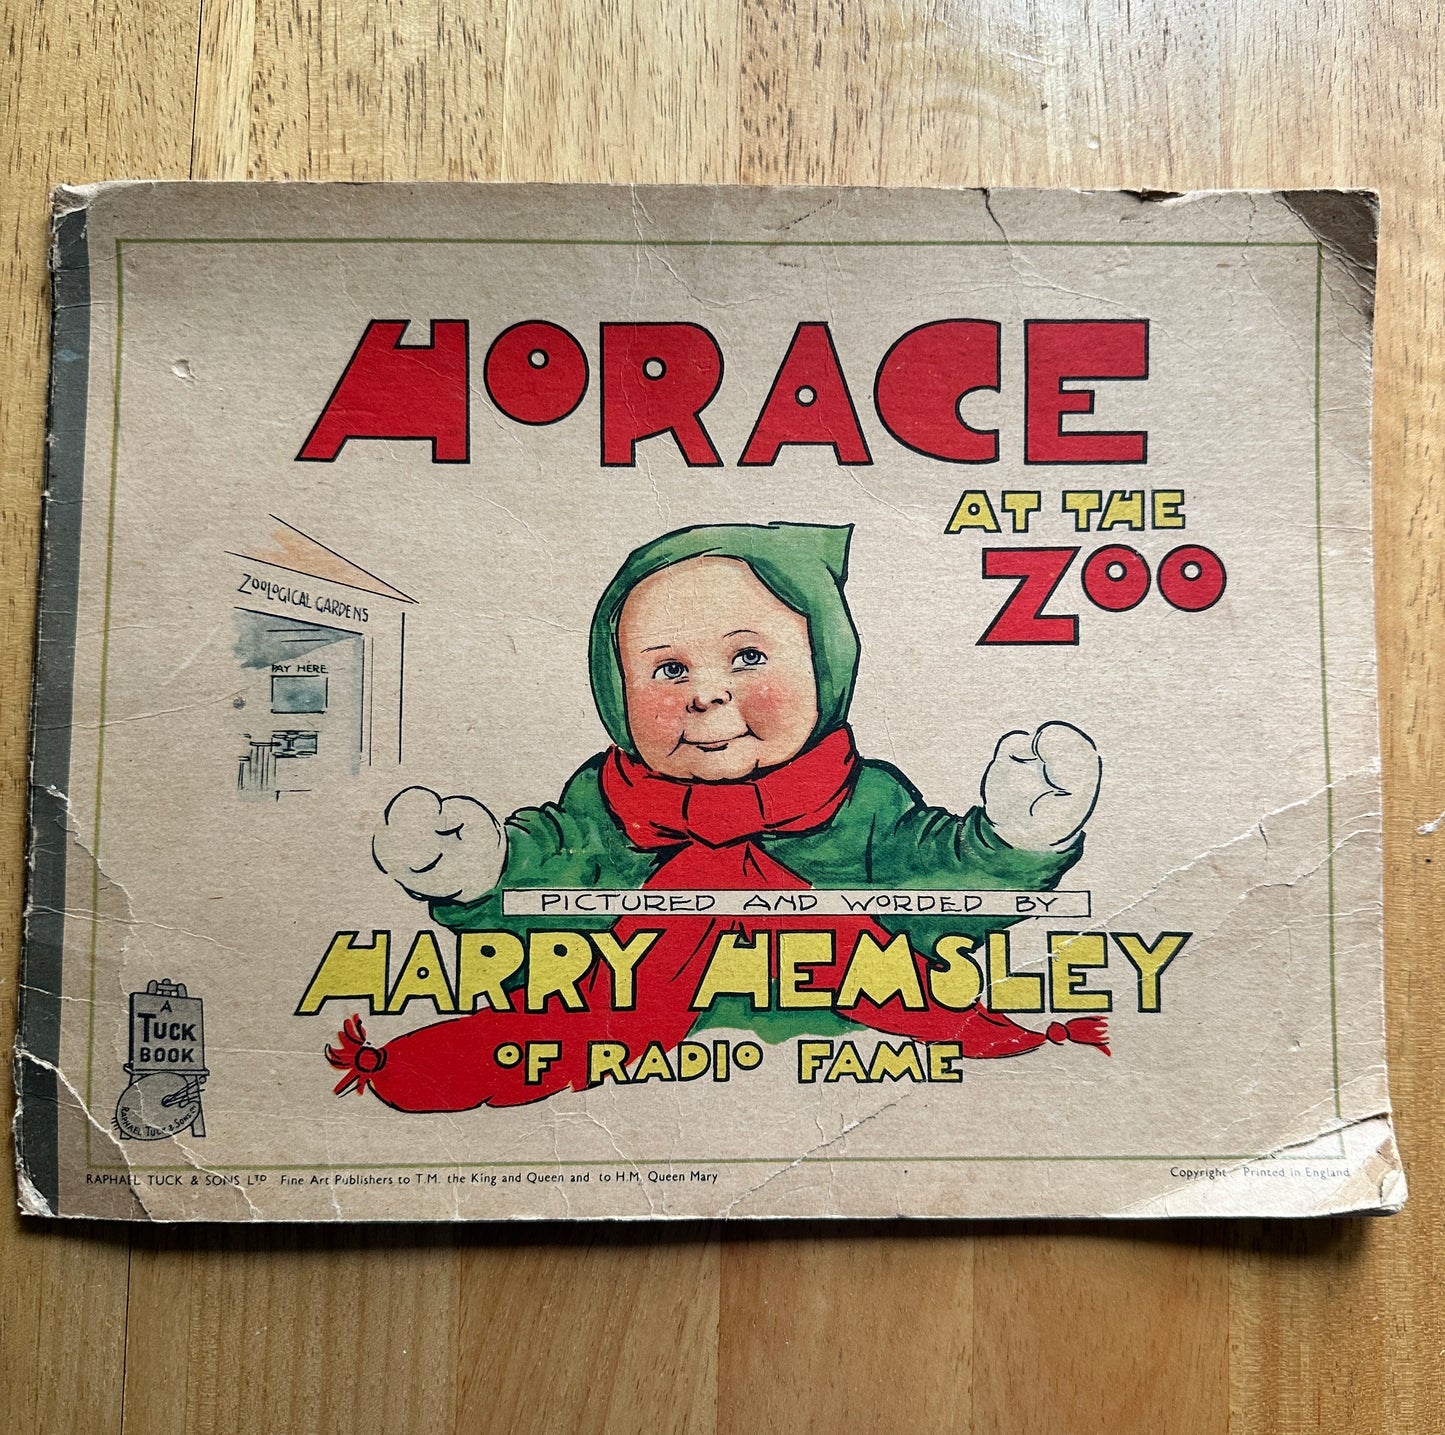 1943*1st* Horace At The Zoo - Harry Hemsley(Raphael Tuck)